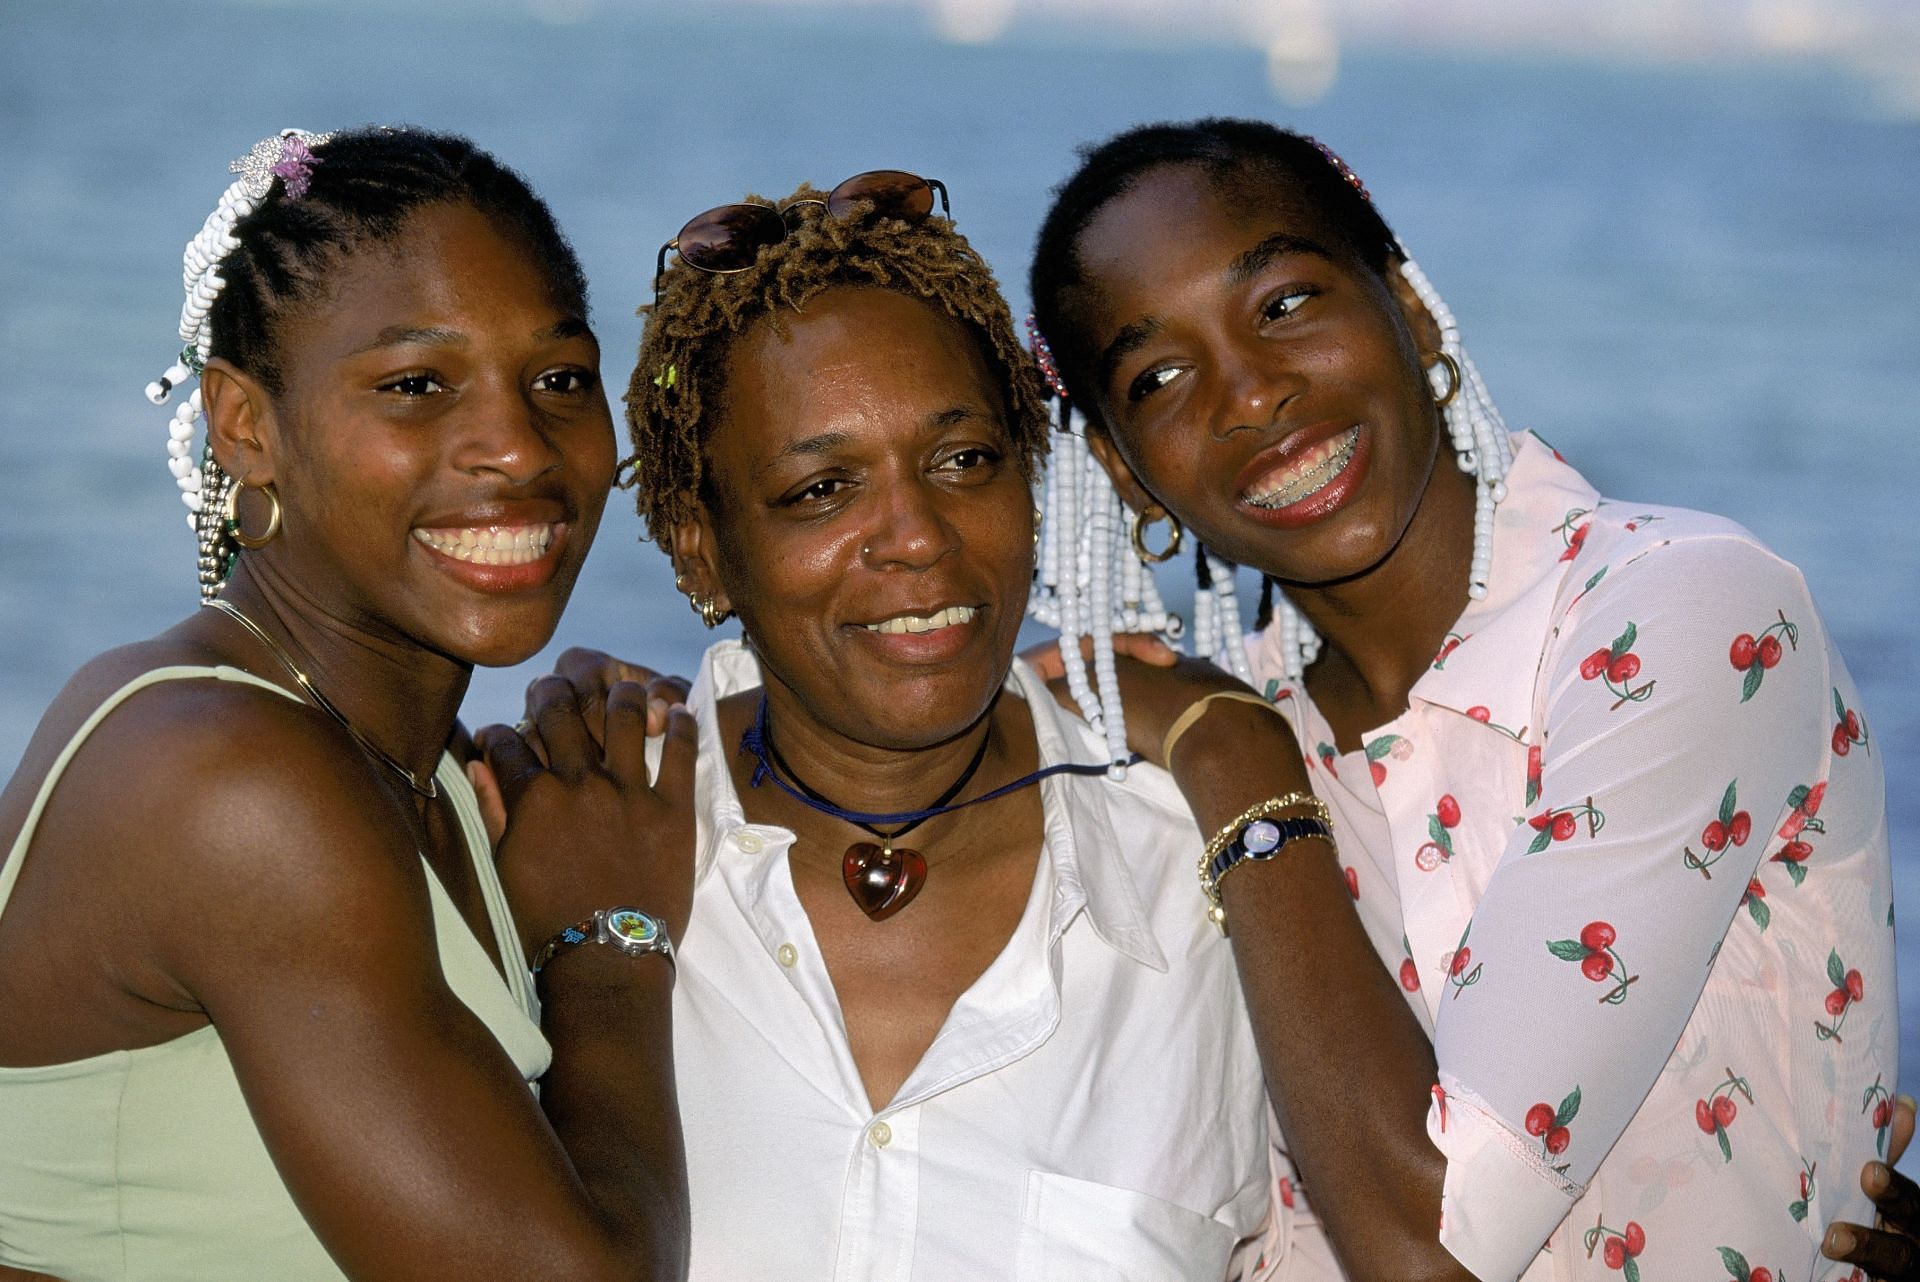 Serena Williams (leftmost) and Venus Williams (rightmost) pose for a photo with their mother Oracene in 1999.